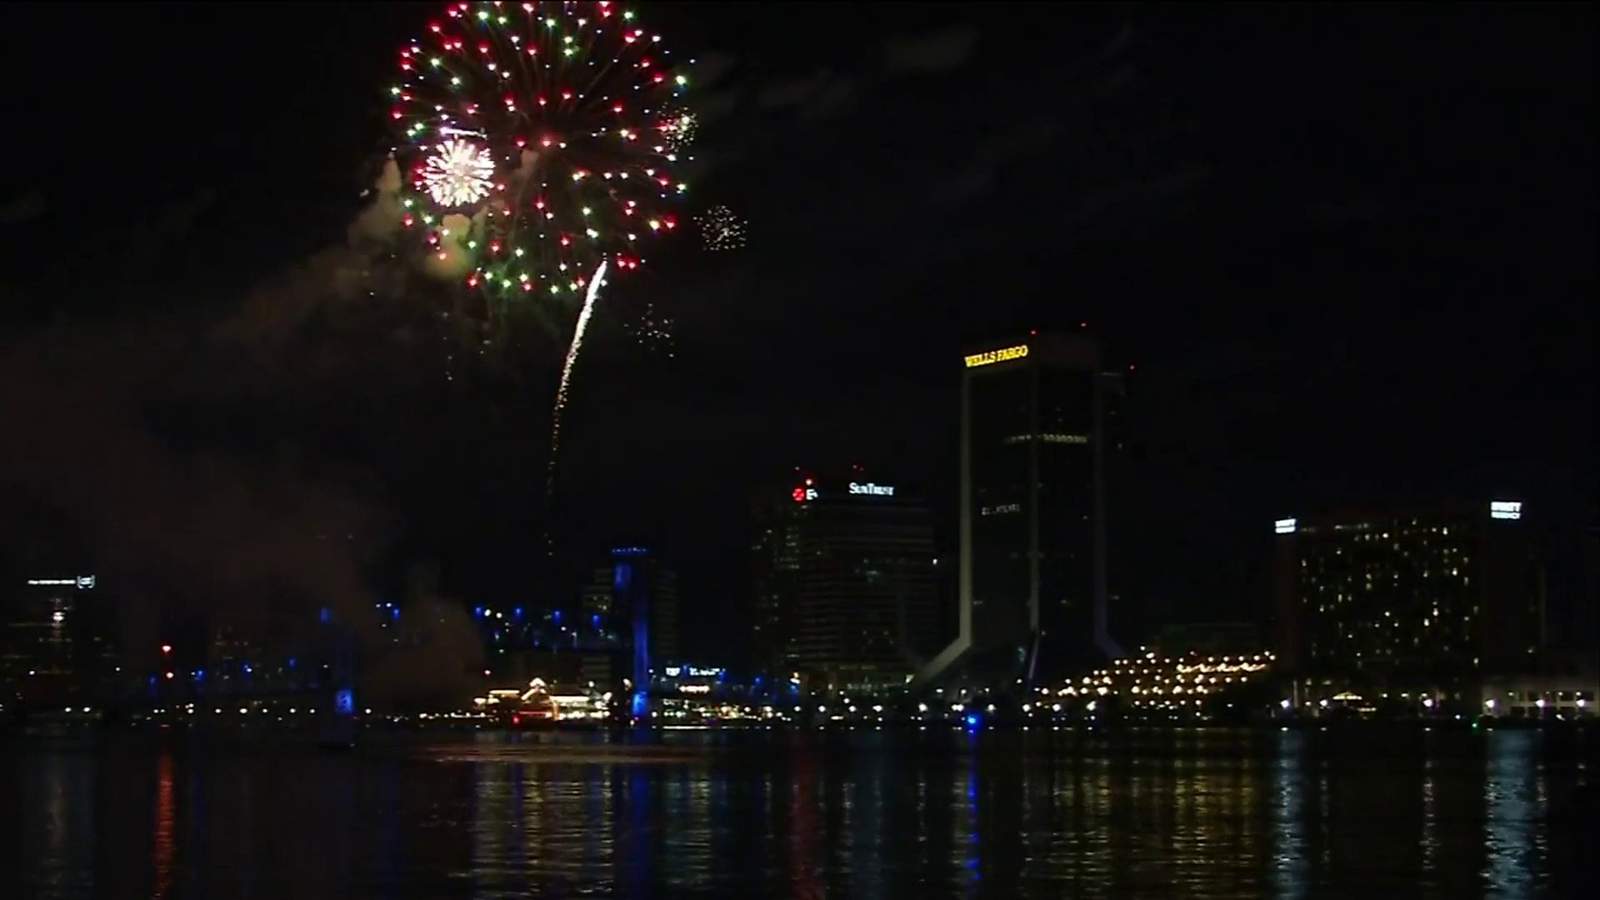 By launching 4th of July fireworks from 6 spots, city hopes to spread out crowds